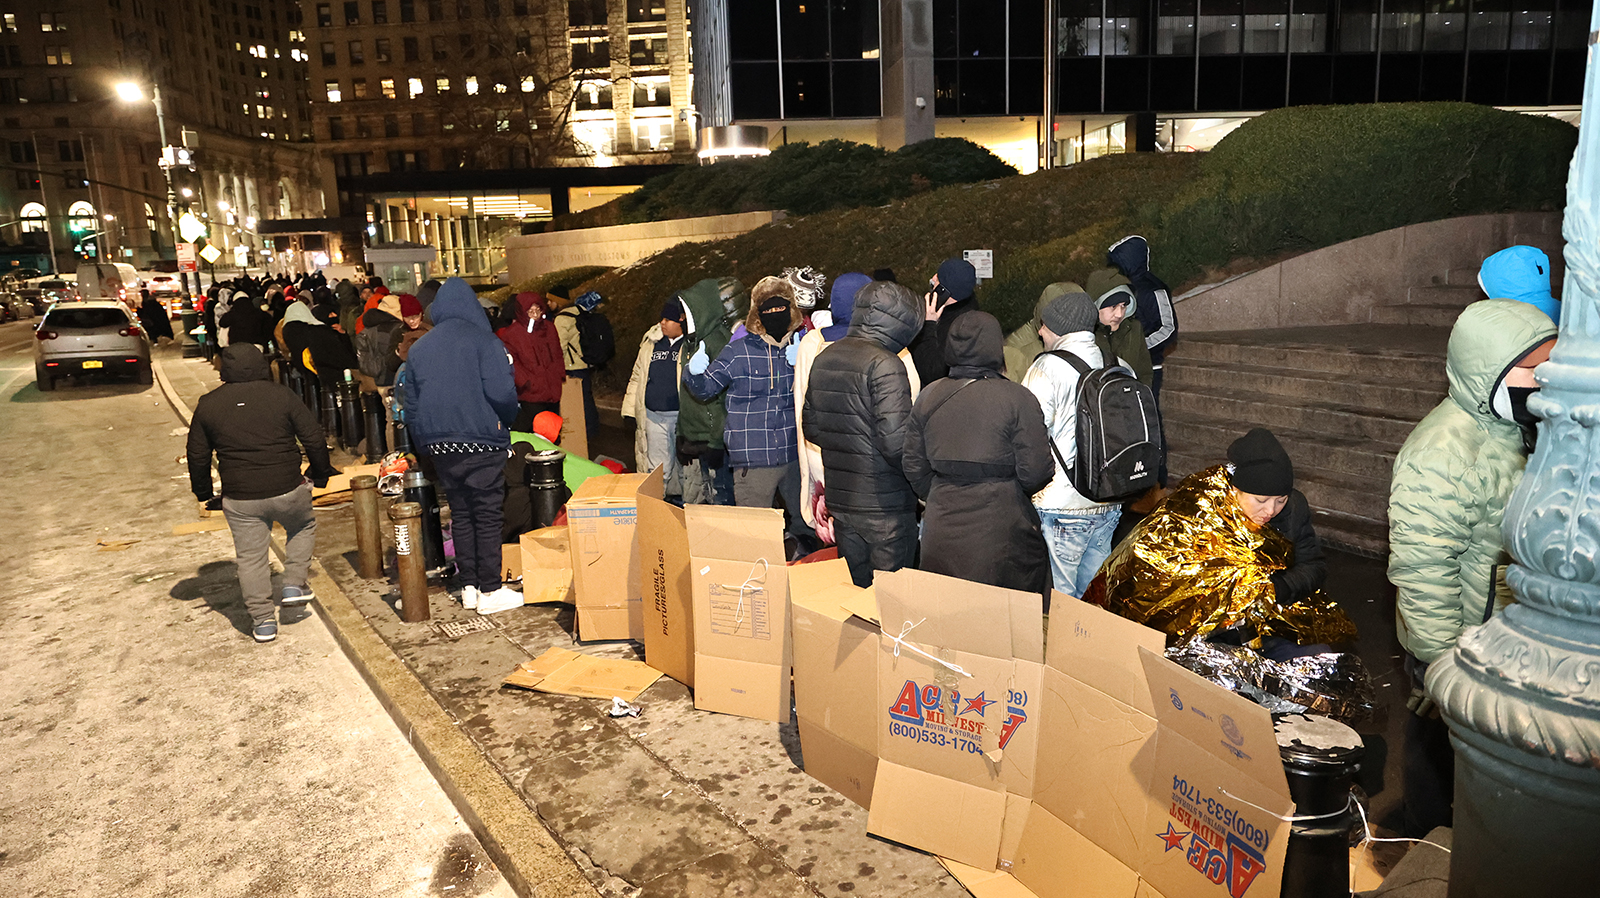 Migrants line up near Foley Square in lower Manhattan in Jan. 2024, hours before the nearby Federal Building opens where many have appointments. (Photo courtesy of Masbia)